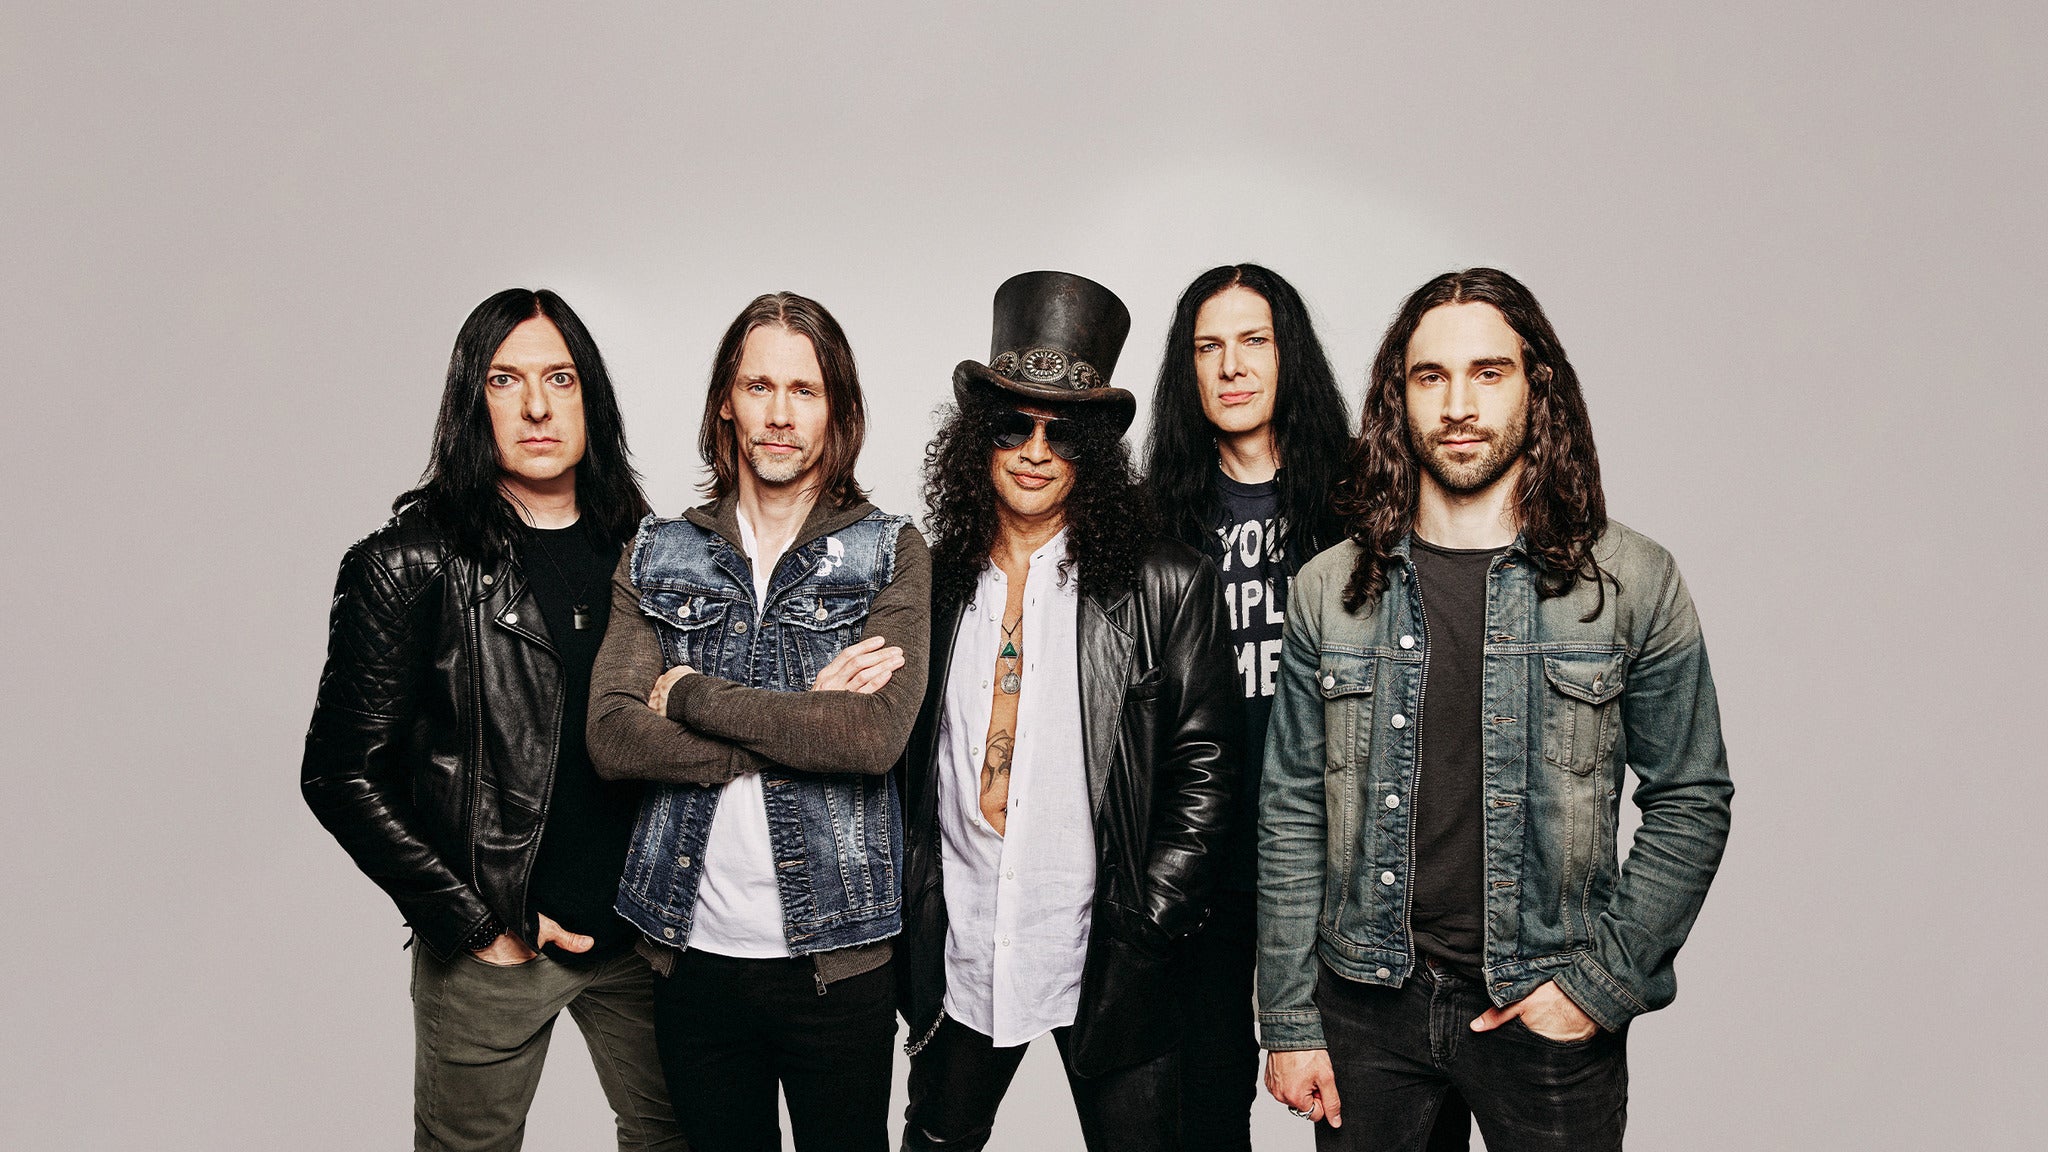 Slash featuring Myles Kennedy and The Conspirators in Nashville promo photo for Spotify presale offer code